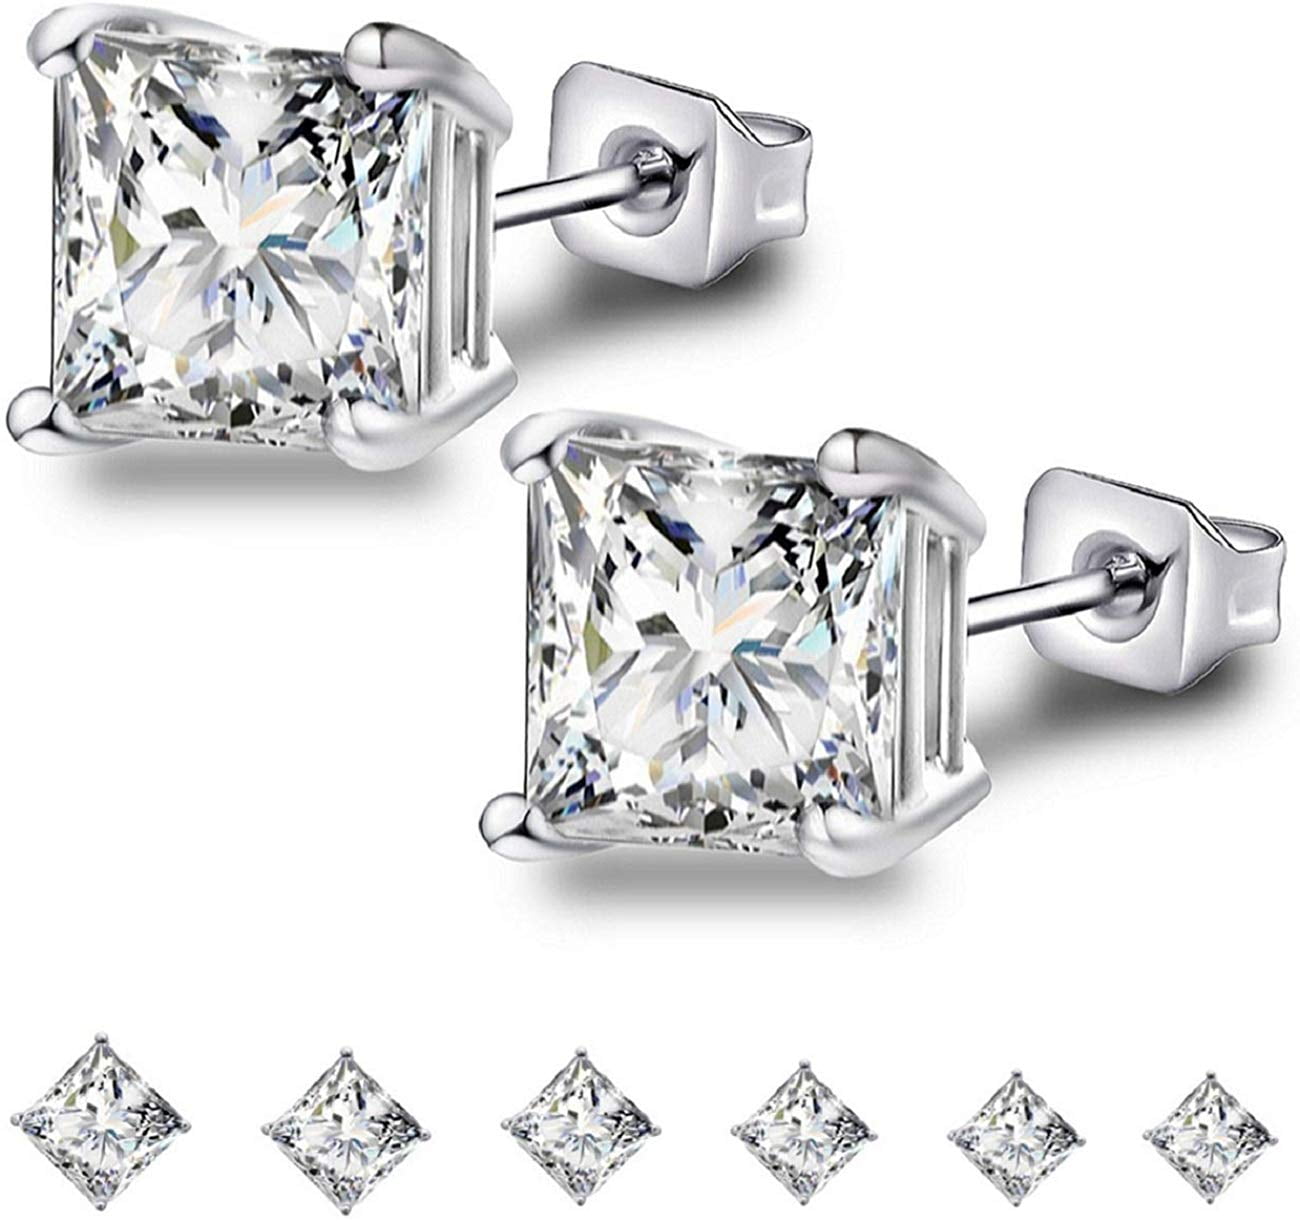 925 Sterling Silver Cubic Zirconia Cz 5mm Square Post Stud Earrings Fine Jewelry Gifts For Women For Her 